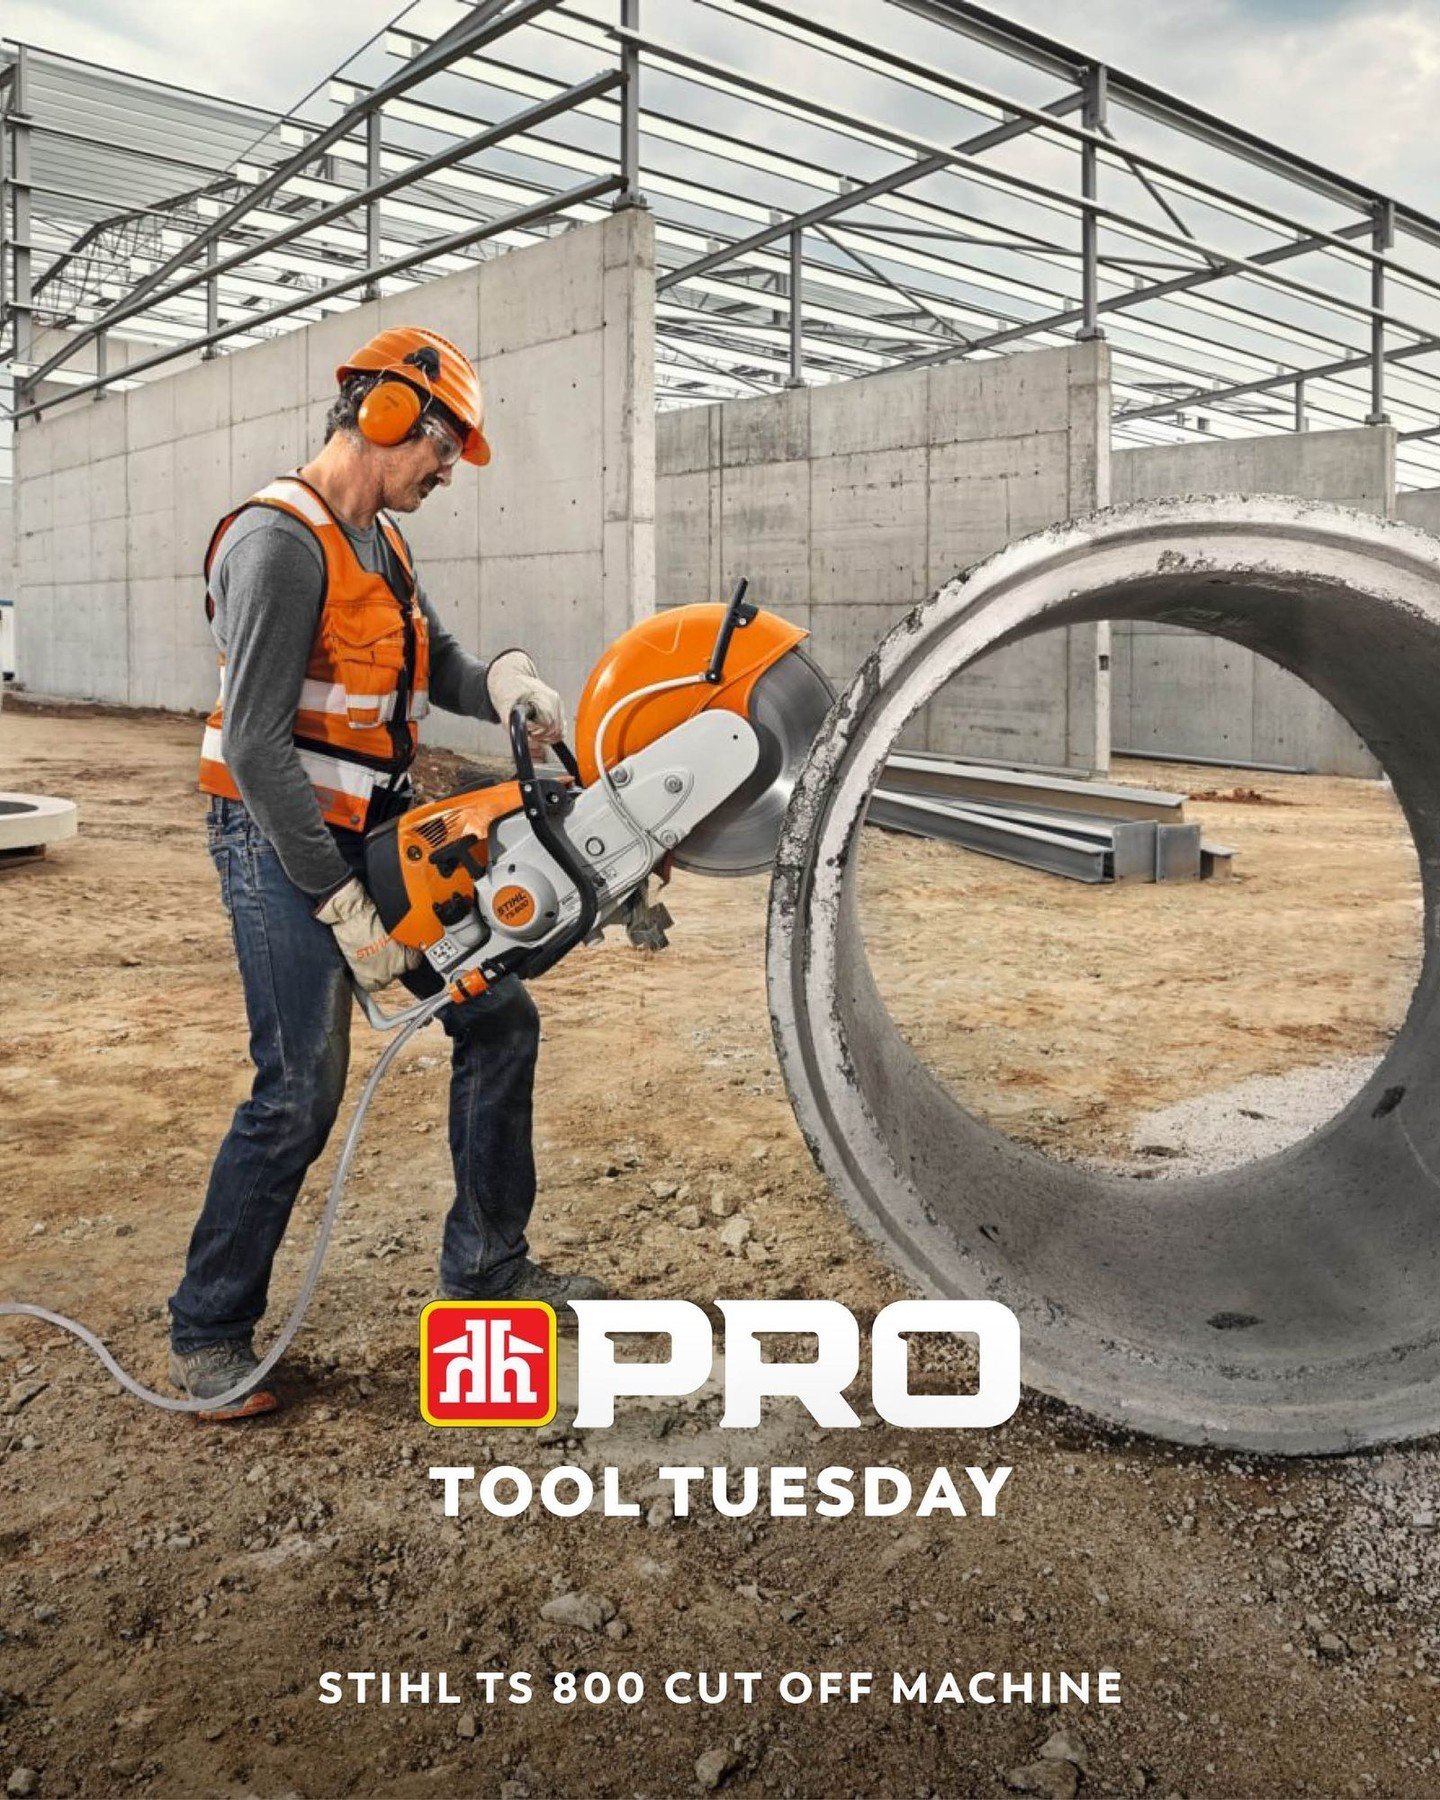 If the material you are tackling requires extremely high engine performance, the STIHL TS 800 Cut-Off Machine with a 400 mm composite cutting wheel is the right choice for you! This machine can be equipped with an optional robust STIHL D-SB diamond c